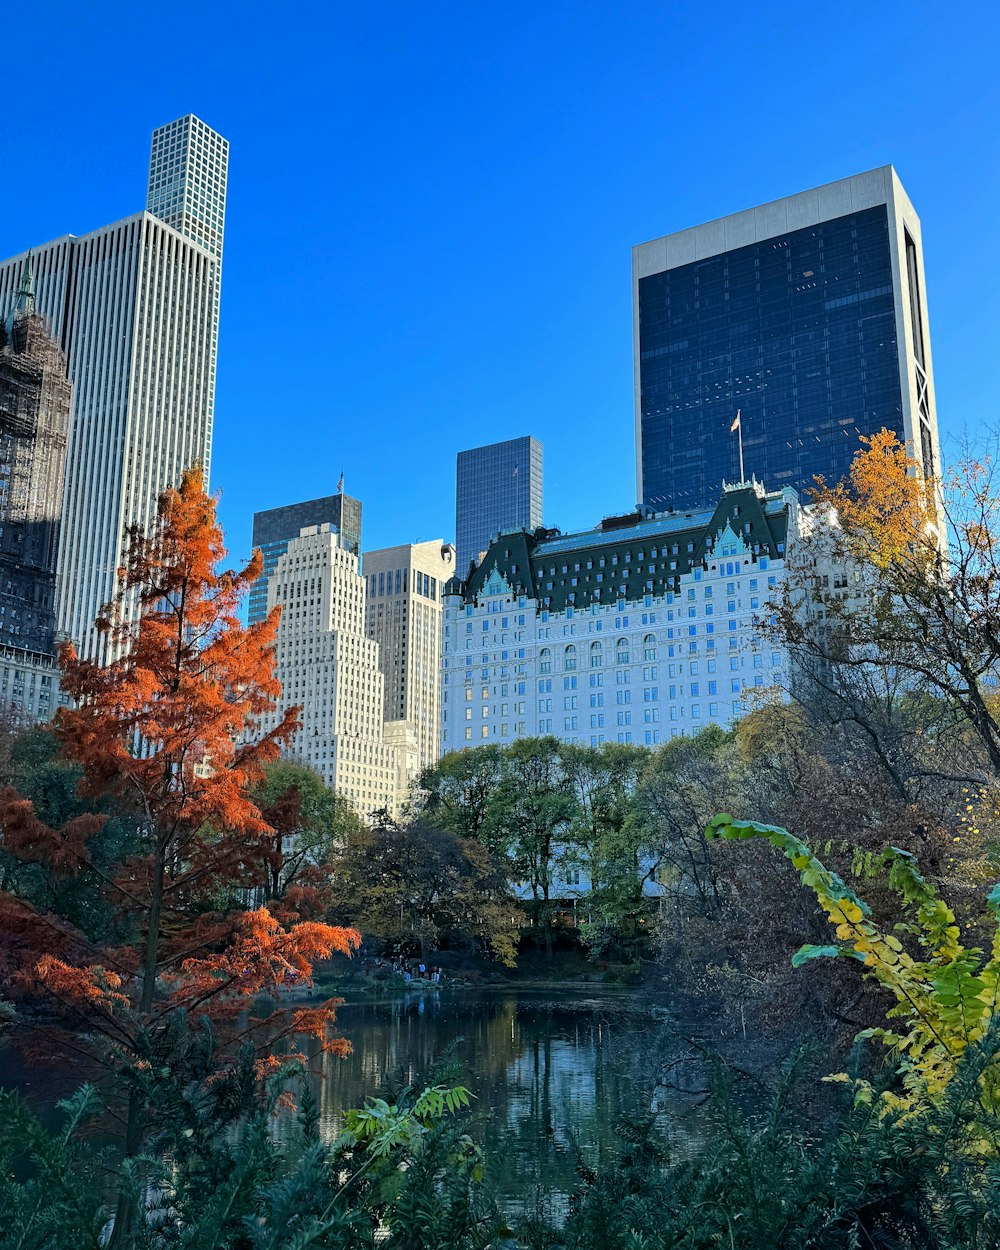 a pond surrounded by tall buildings in a city